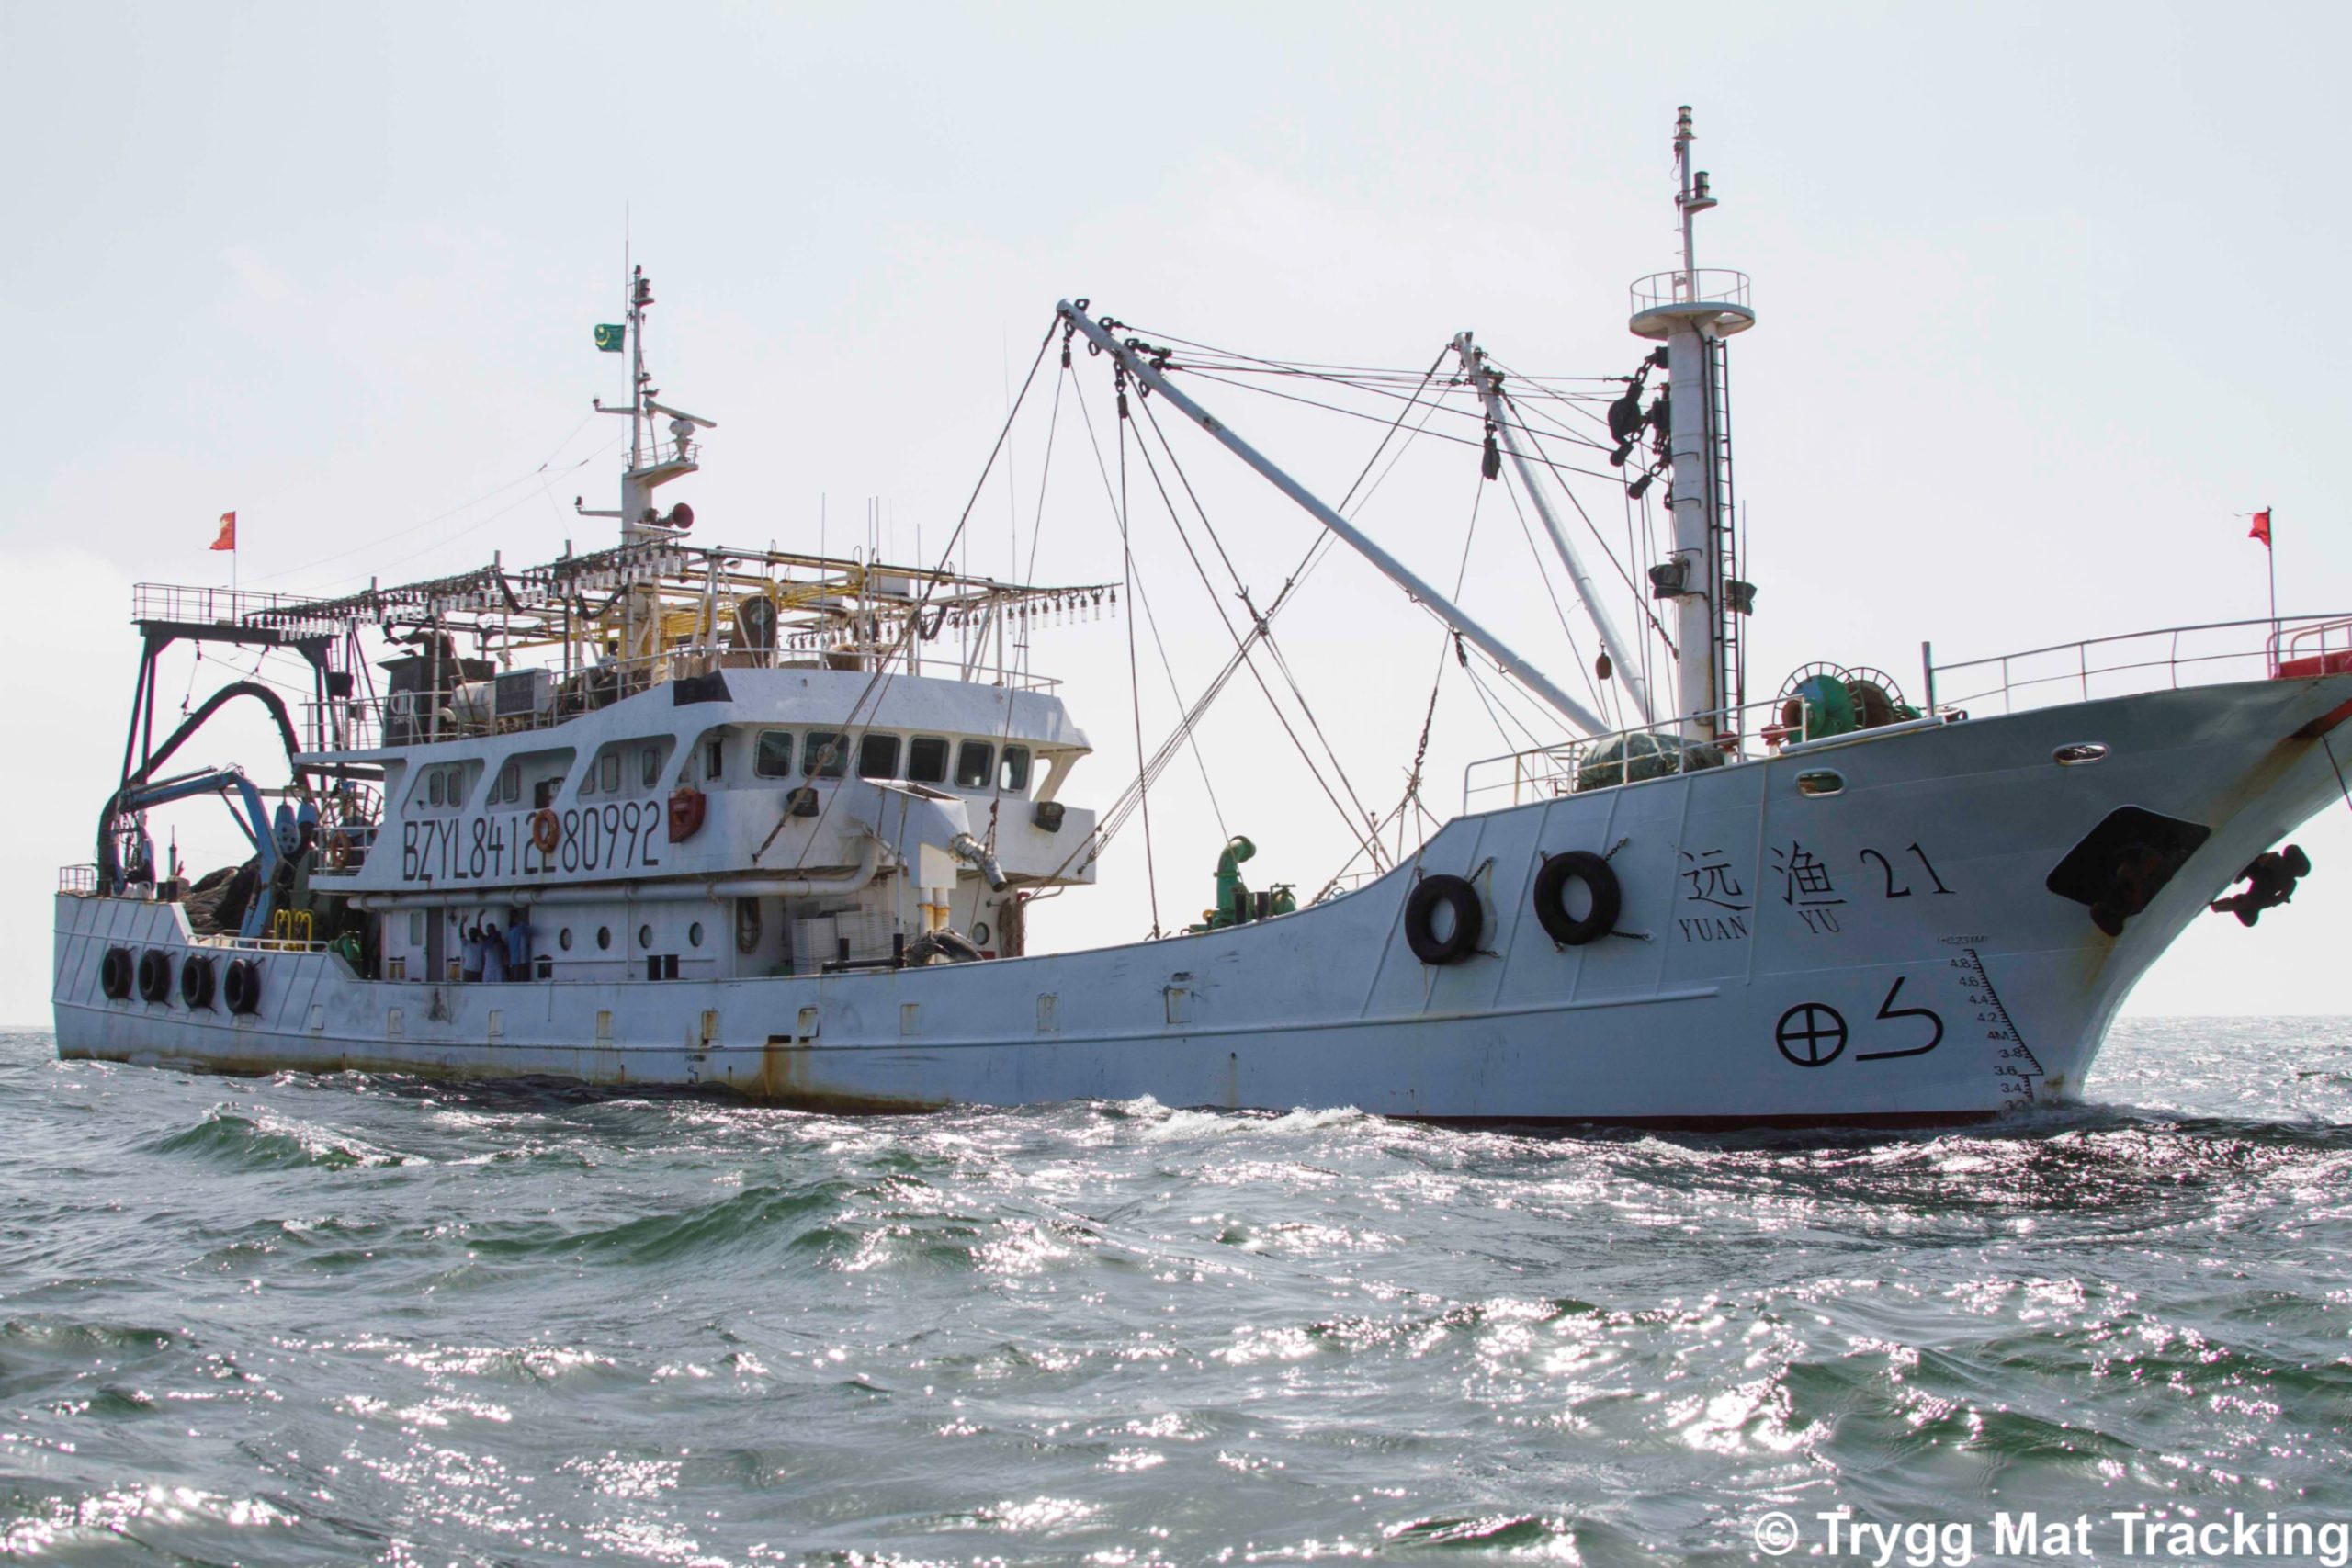 SPOTLIGHT ON: THE USE OF AFRICAN FLAG REGISTRIES BY HIGH-RISK FISHING OPERATORS